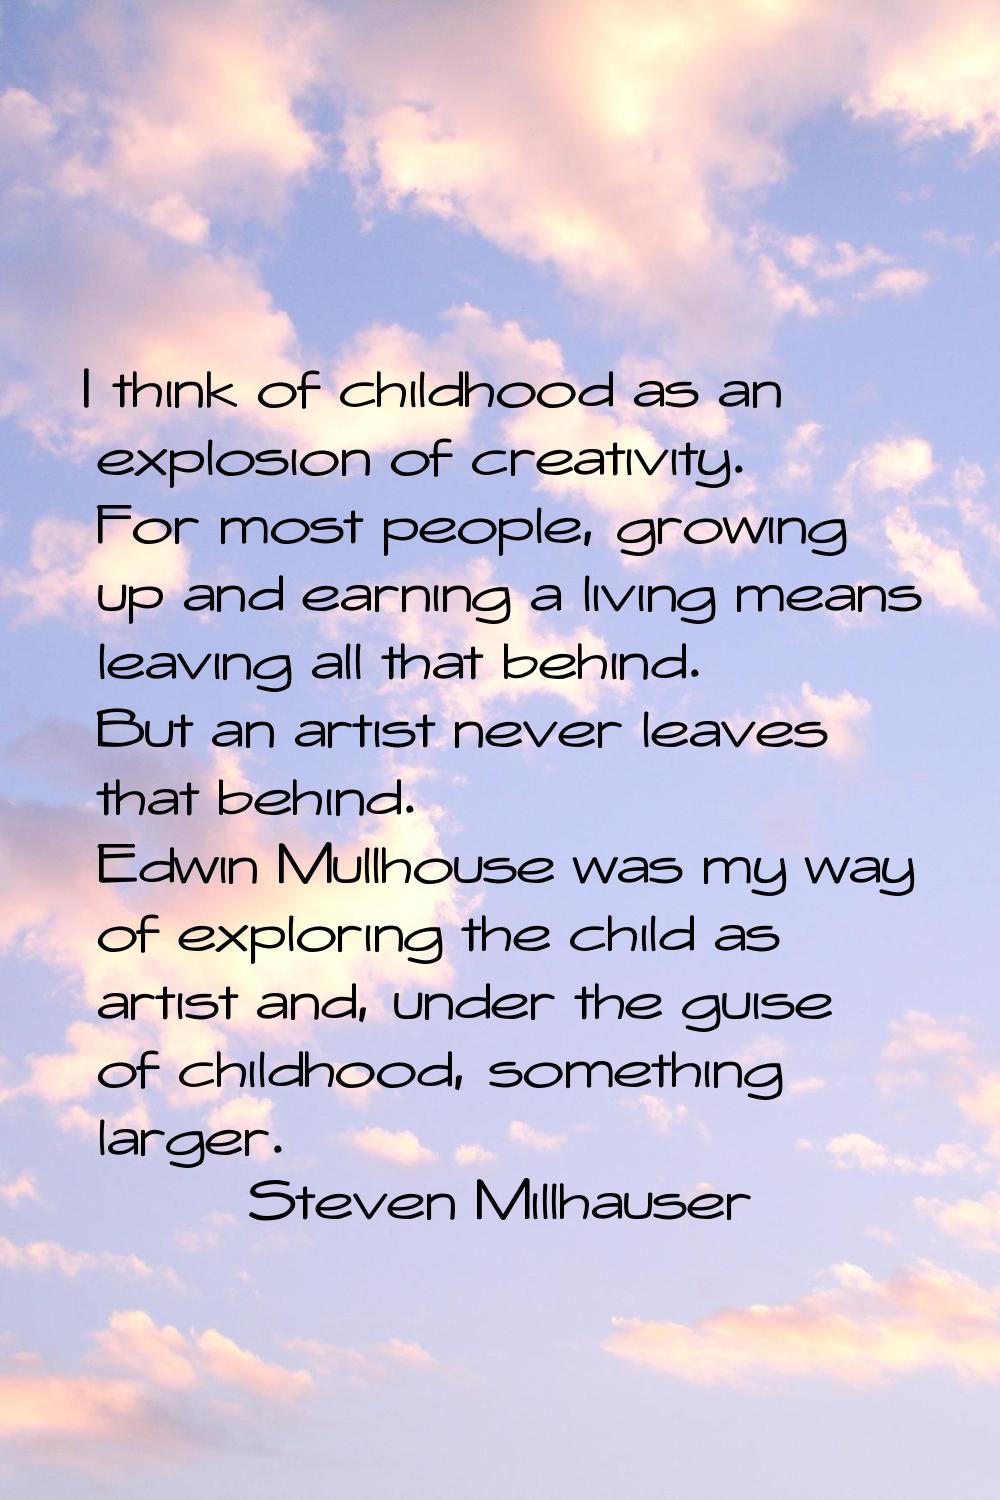 I think of childhood as an explosion of creativity. For most people, growing up and earning a livin